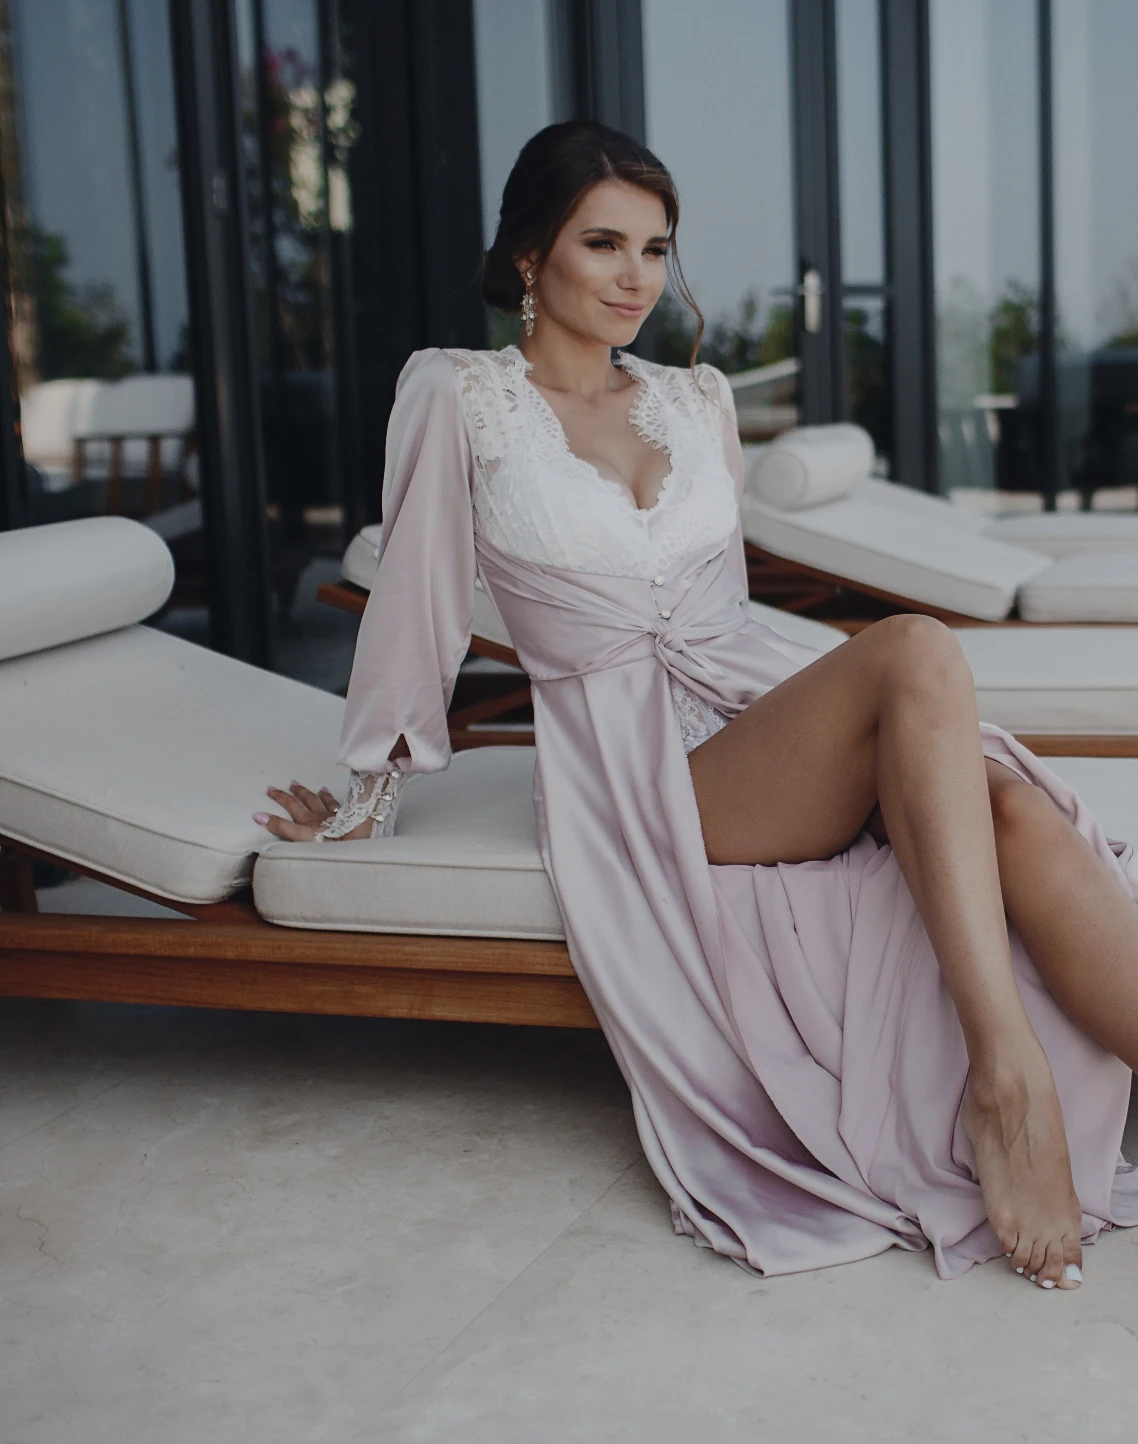 fancy woman on a lounge chair | Ingram Cosmetic Surgery Nashville